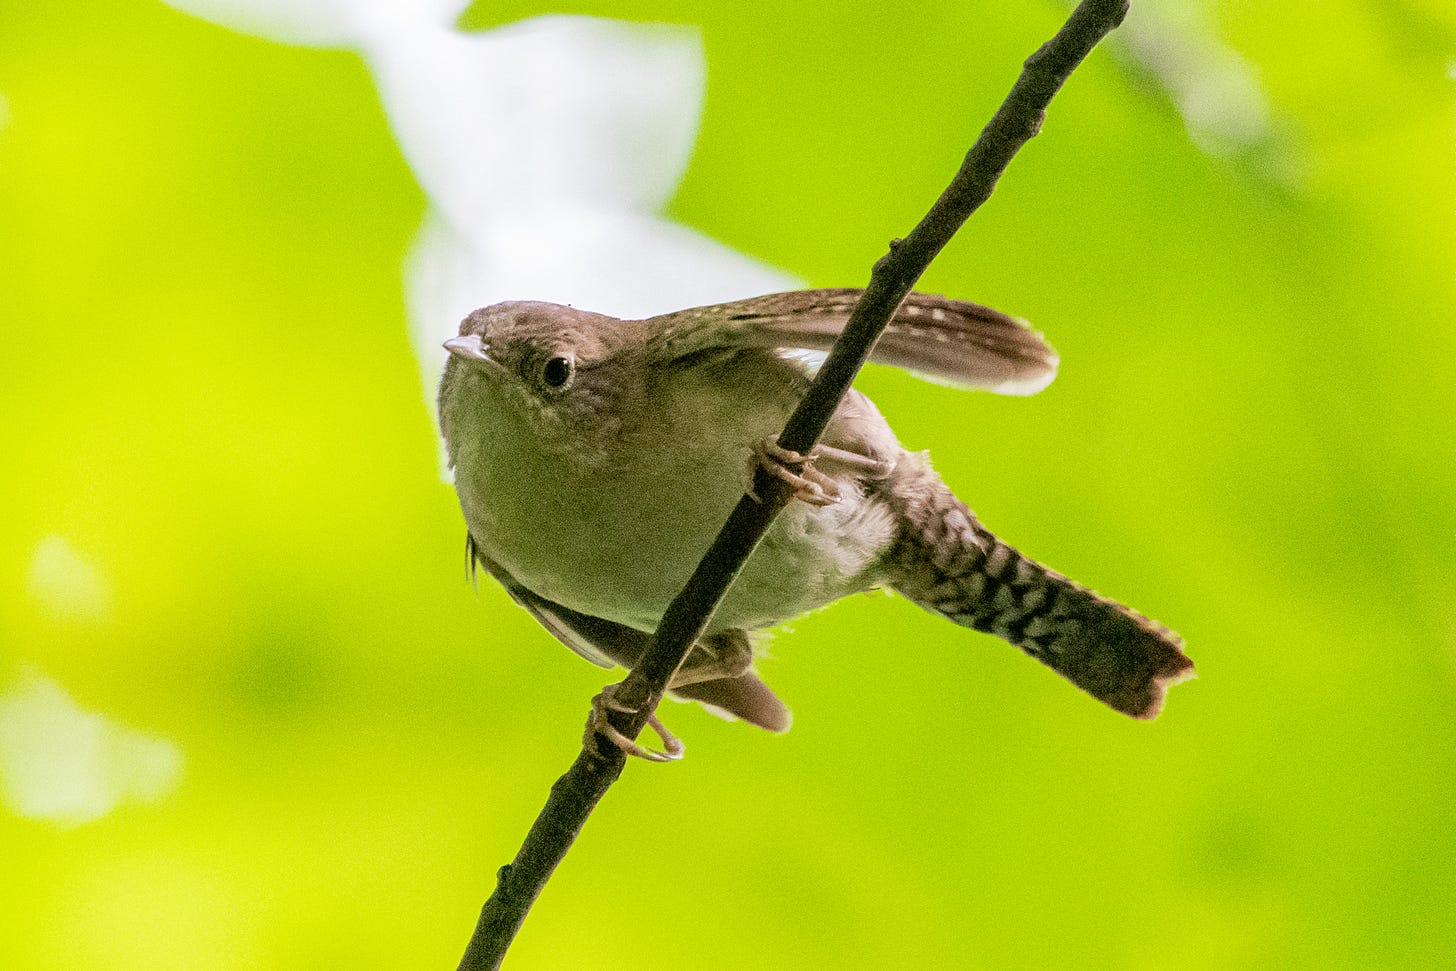  querulous house wren fledgling, trembling its wings in a sympathy ploy for a parent, not visible, who seemed to have decided the fledgling was big enough to fend for itself